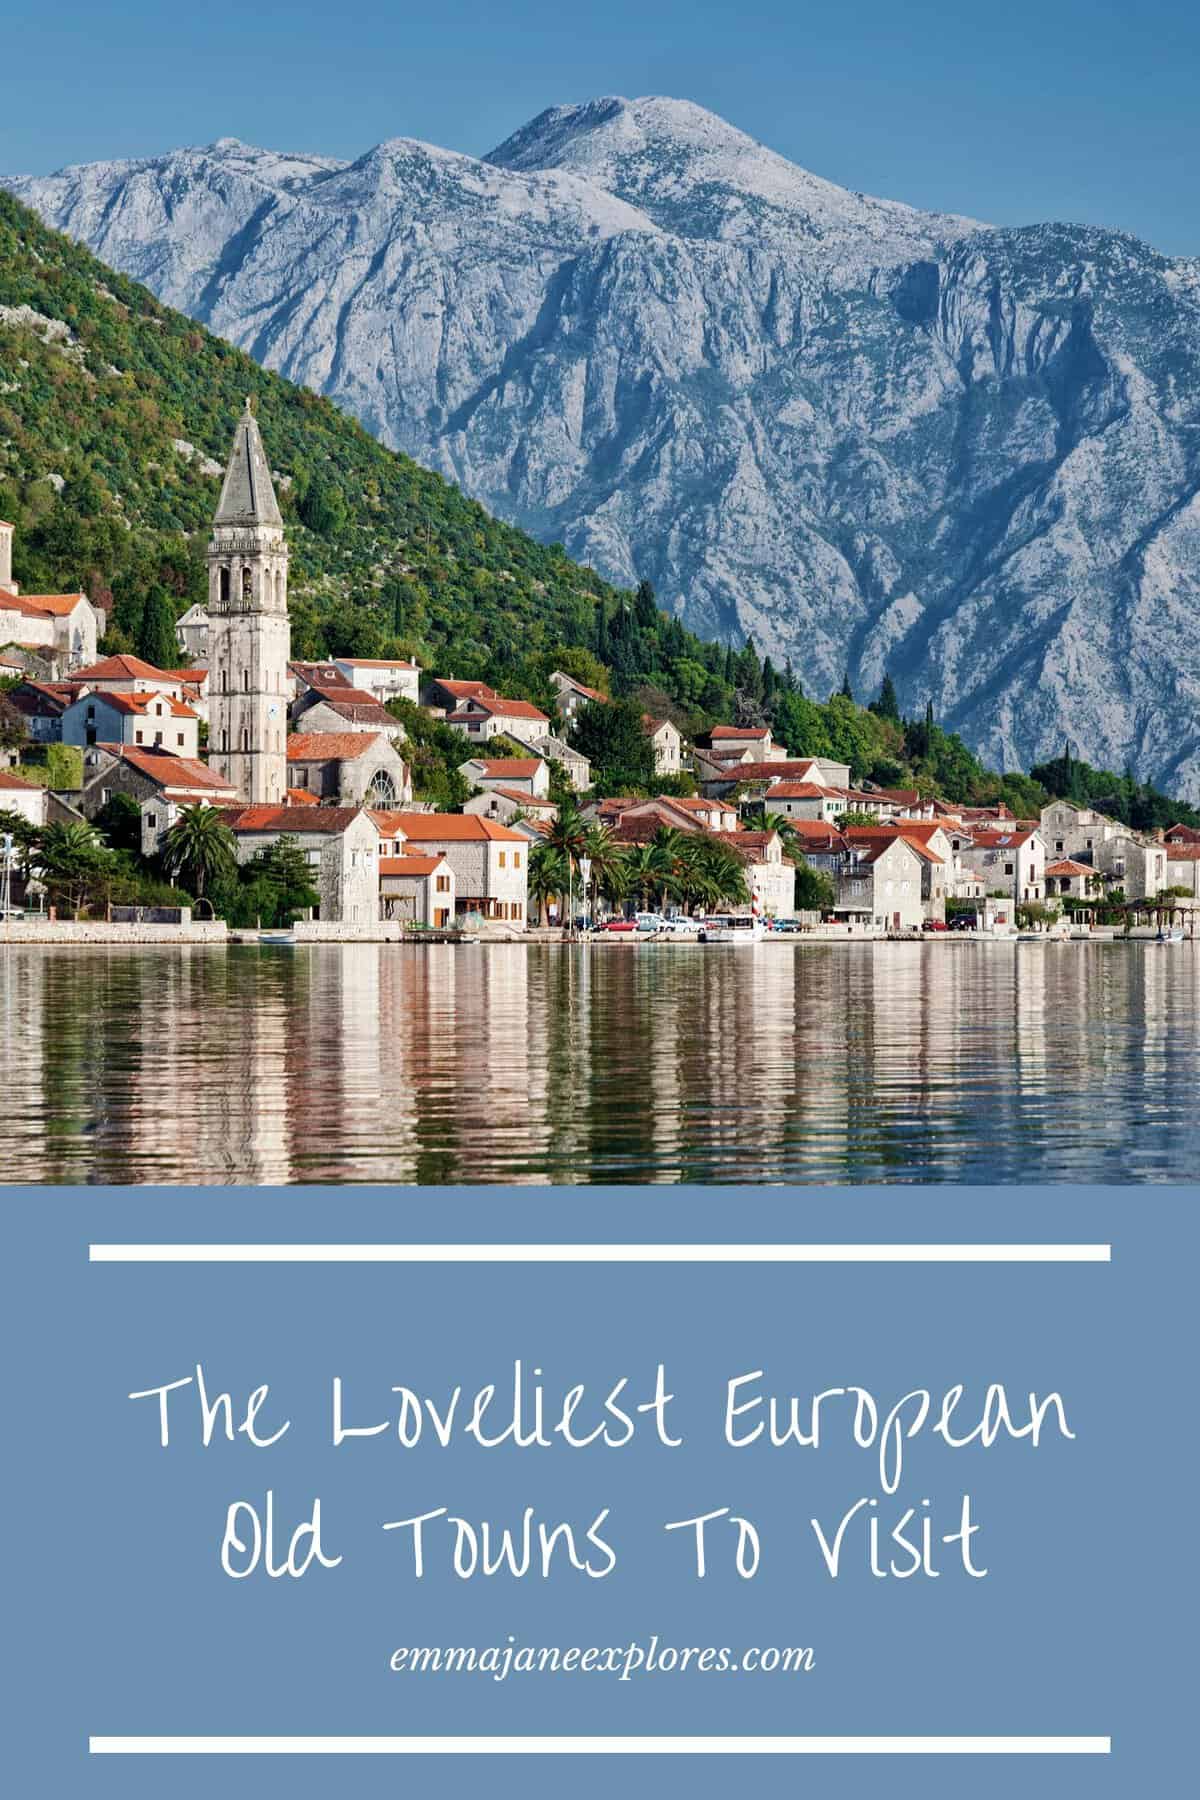 The Most Beautiful Old Towns In Europe - Emma Jane Explores